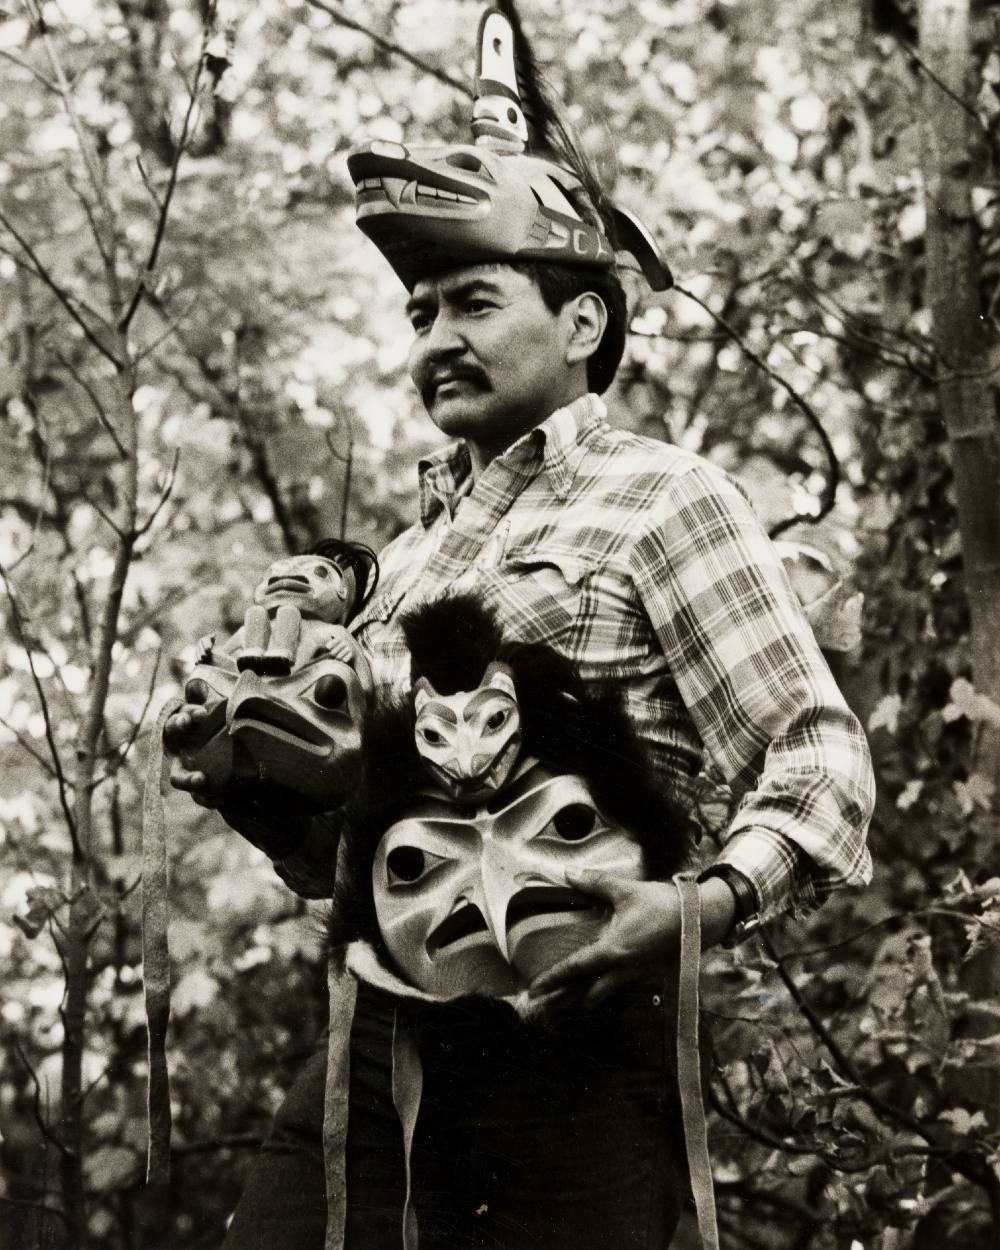 A black and white photo of Dempsey Bob depicts the artist wearing and holding three of his works from 1987. He is standing in a plaid shirt. He is wearing <em>Killer Whale Headdress</em> and holding <em>Eagle Human Mask</em> and <em>Eagle Bear Mask</em>. He is looking towards the left side of the frame with trees behind him. 